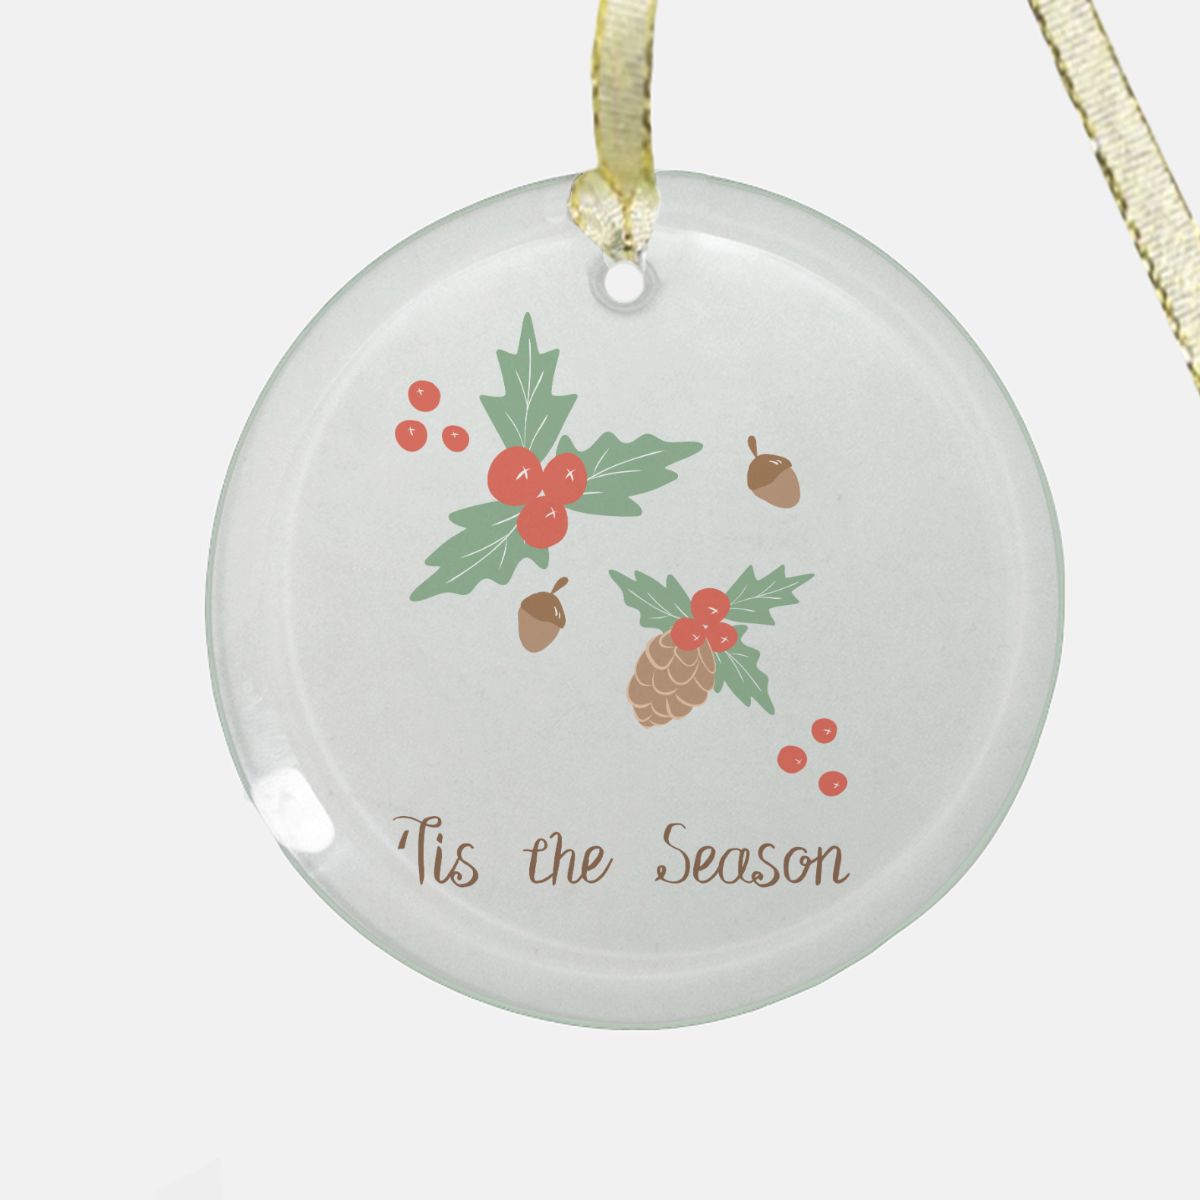 Round Clear Glass Holiday Ornament - Tis the Season